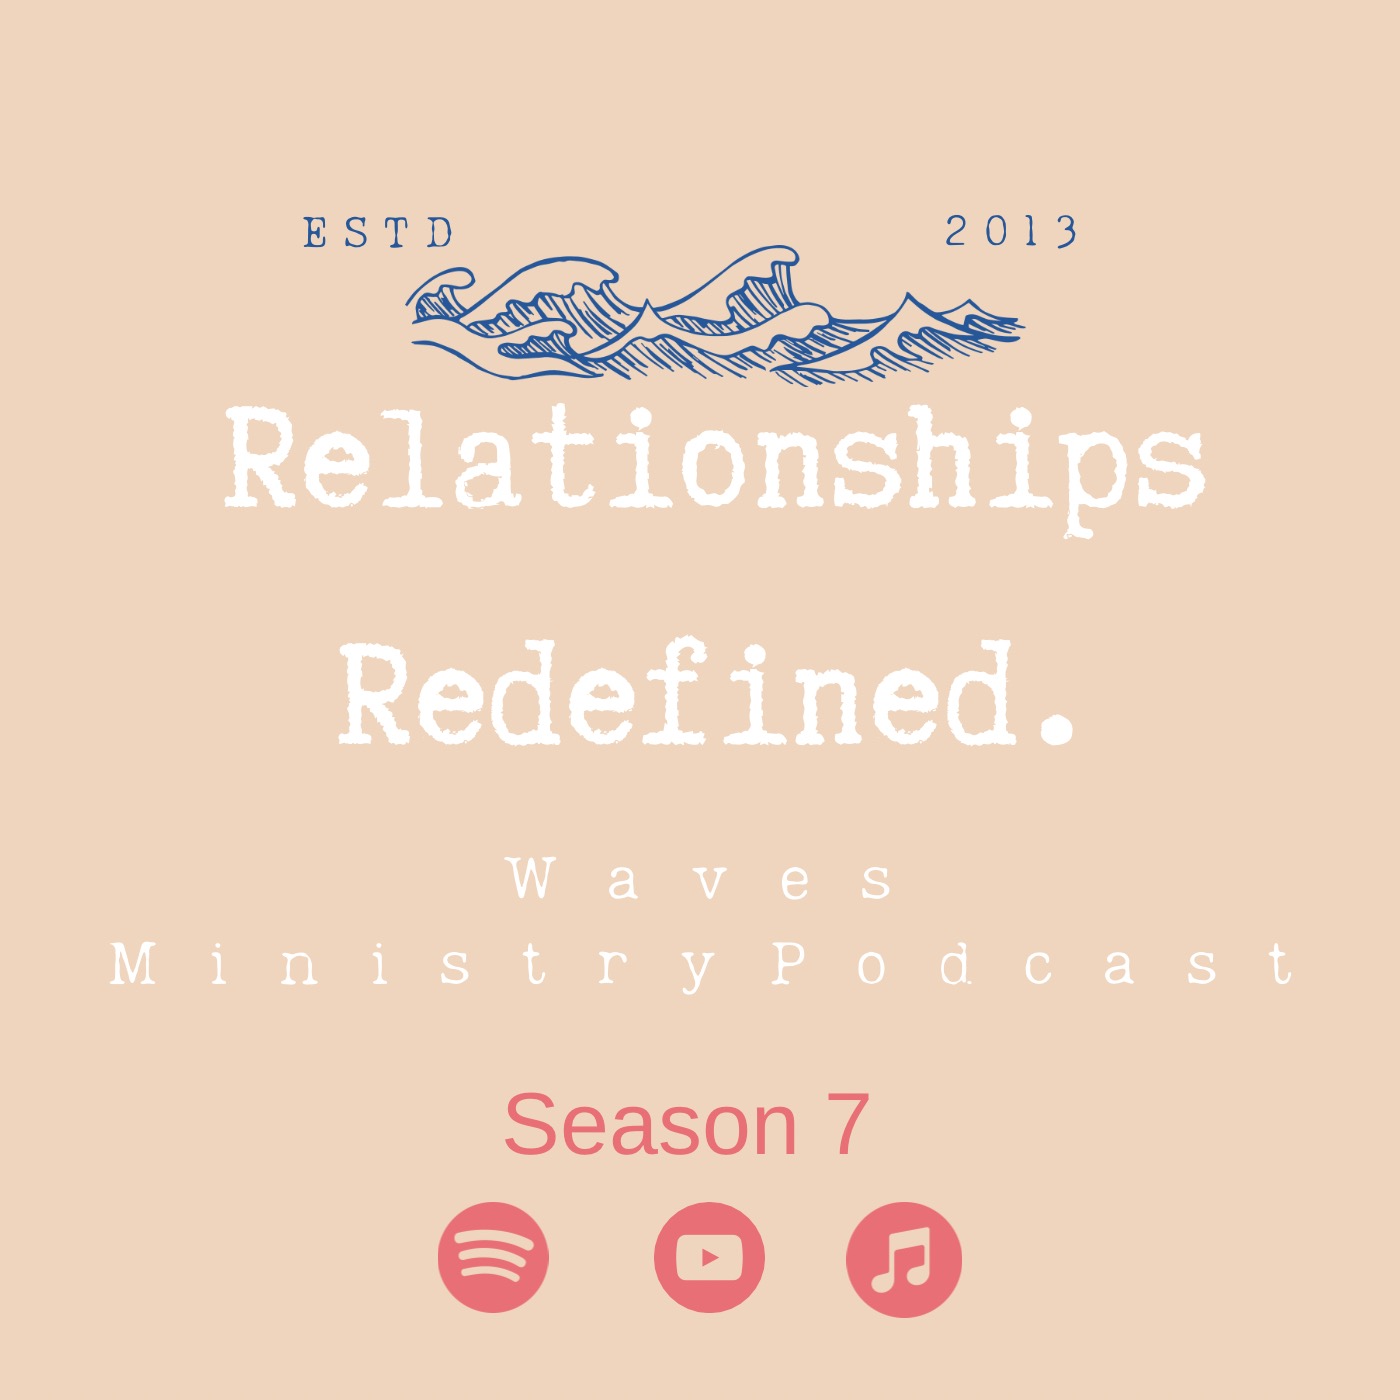 Waves Ministry Podcast